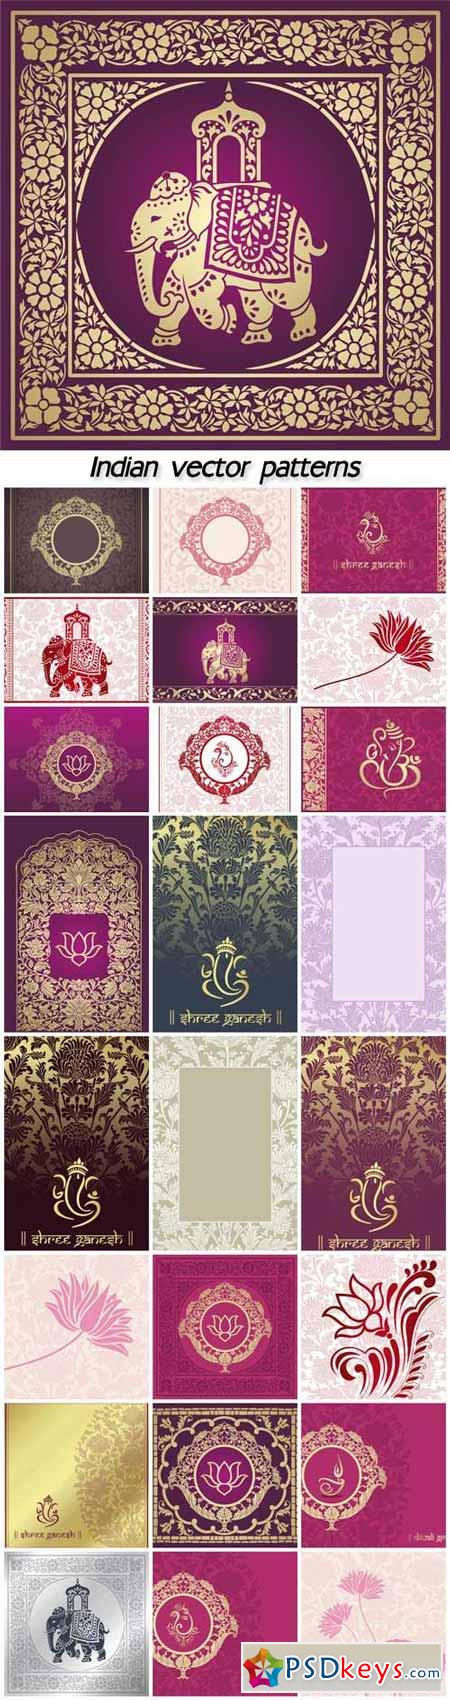 Indian vector backgrounds with patterns and flowers